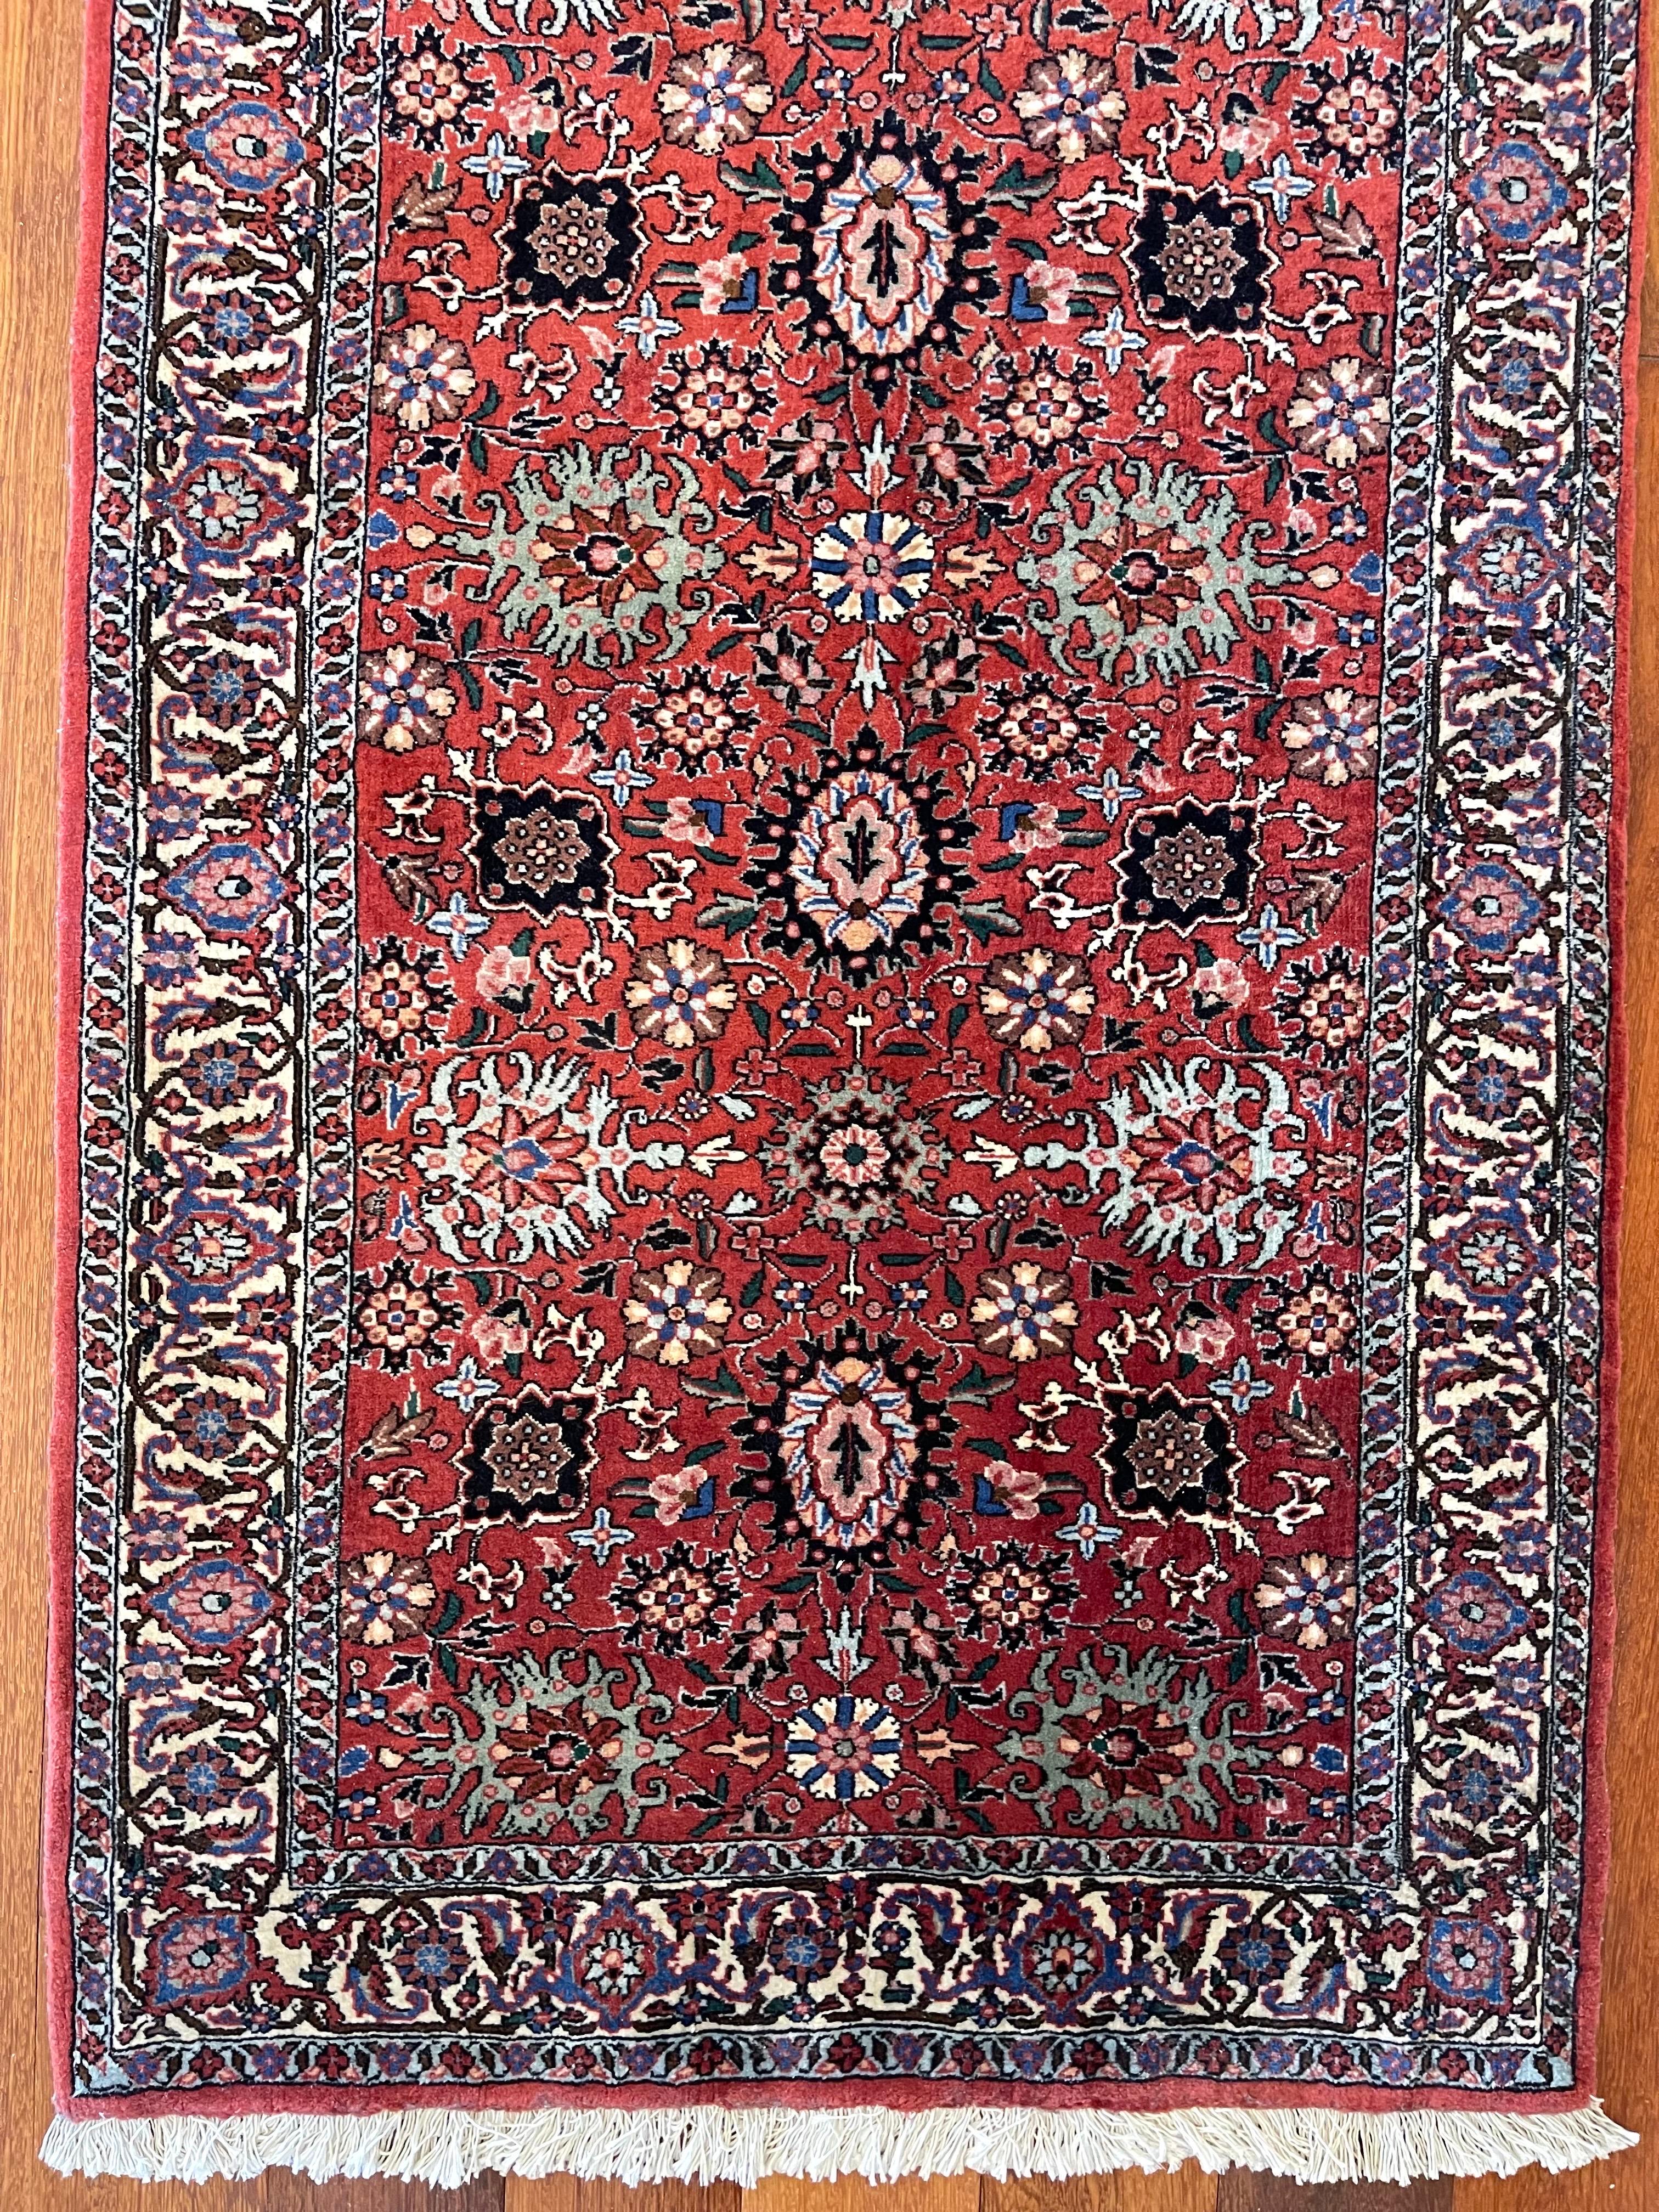 This Authentic beautiful Bijar runner has wool pile and cotton foundation with allover floral (Golafshan) design. It is made using high-quality wool, and the knots are beaten down using a heavy metal comb to give a tight, dirt-resistant pile. This